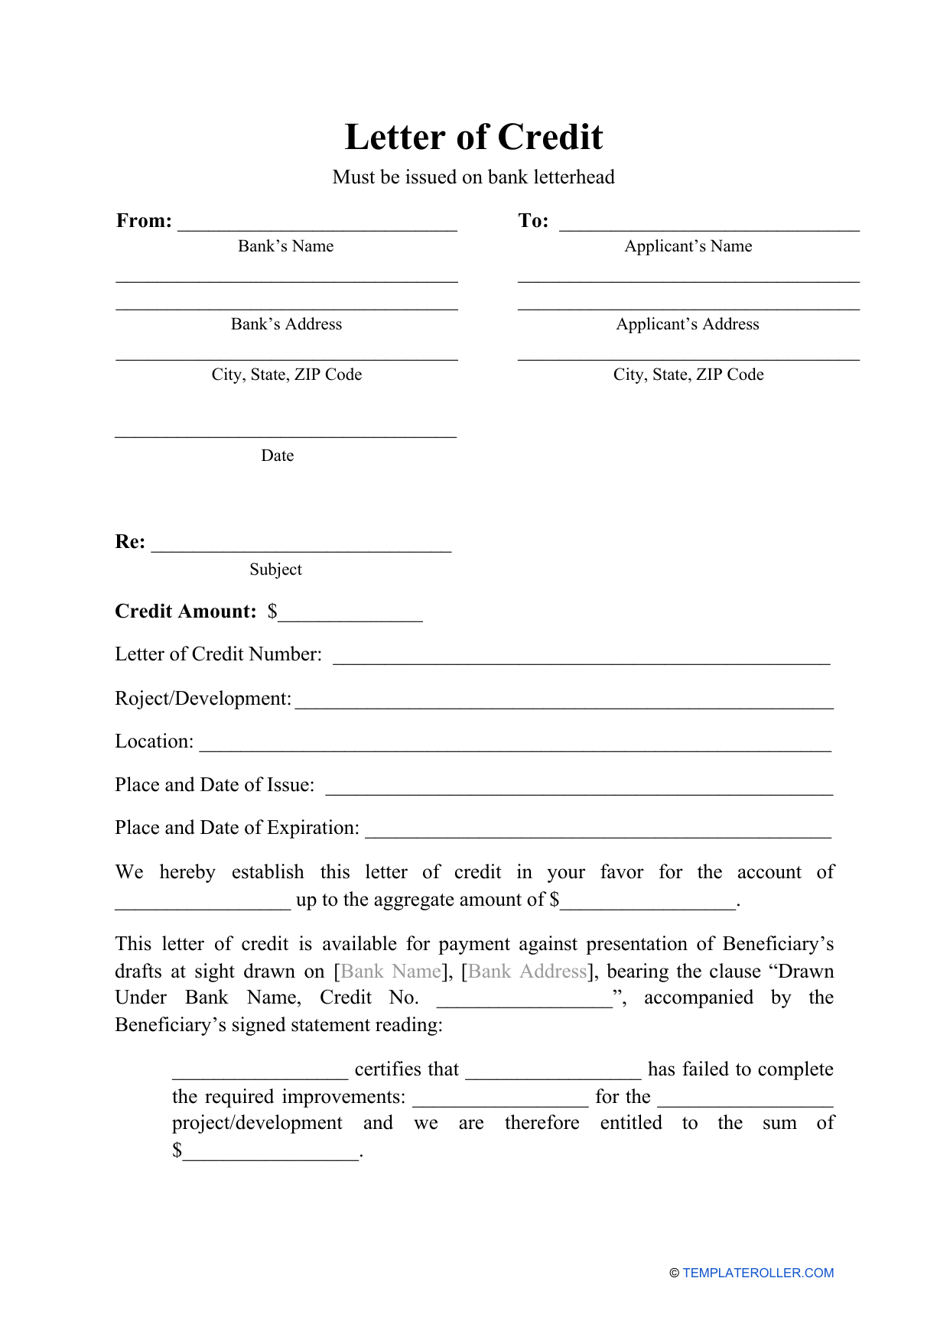 Letter of Credit Template Download Printable PDF Templateroller